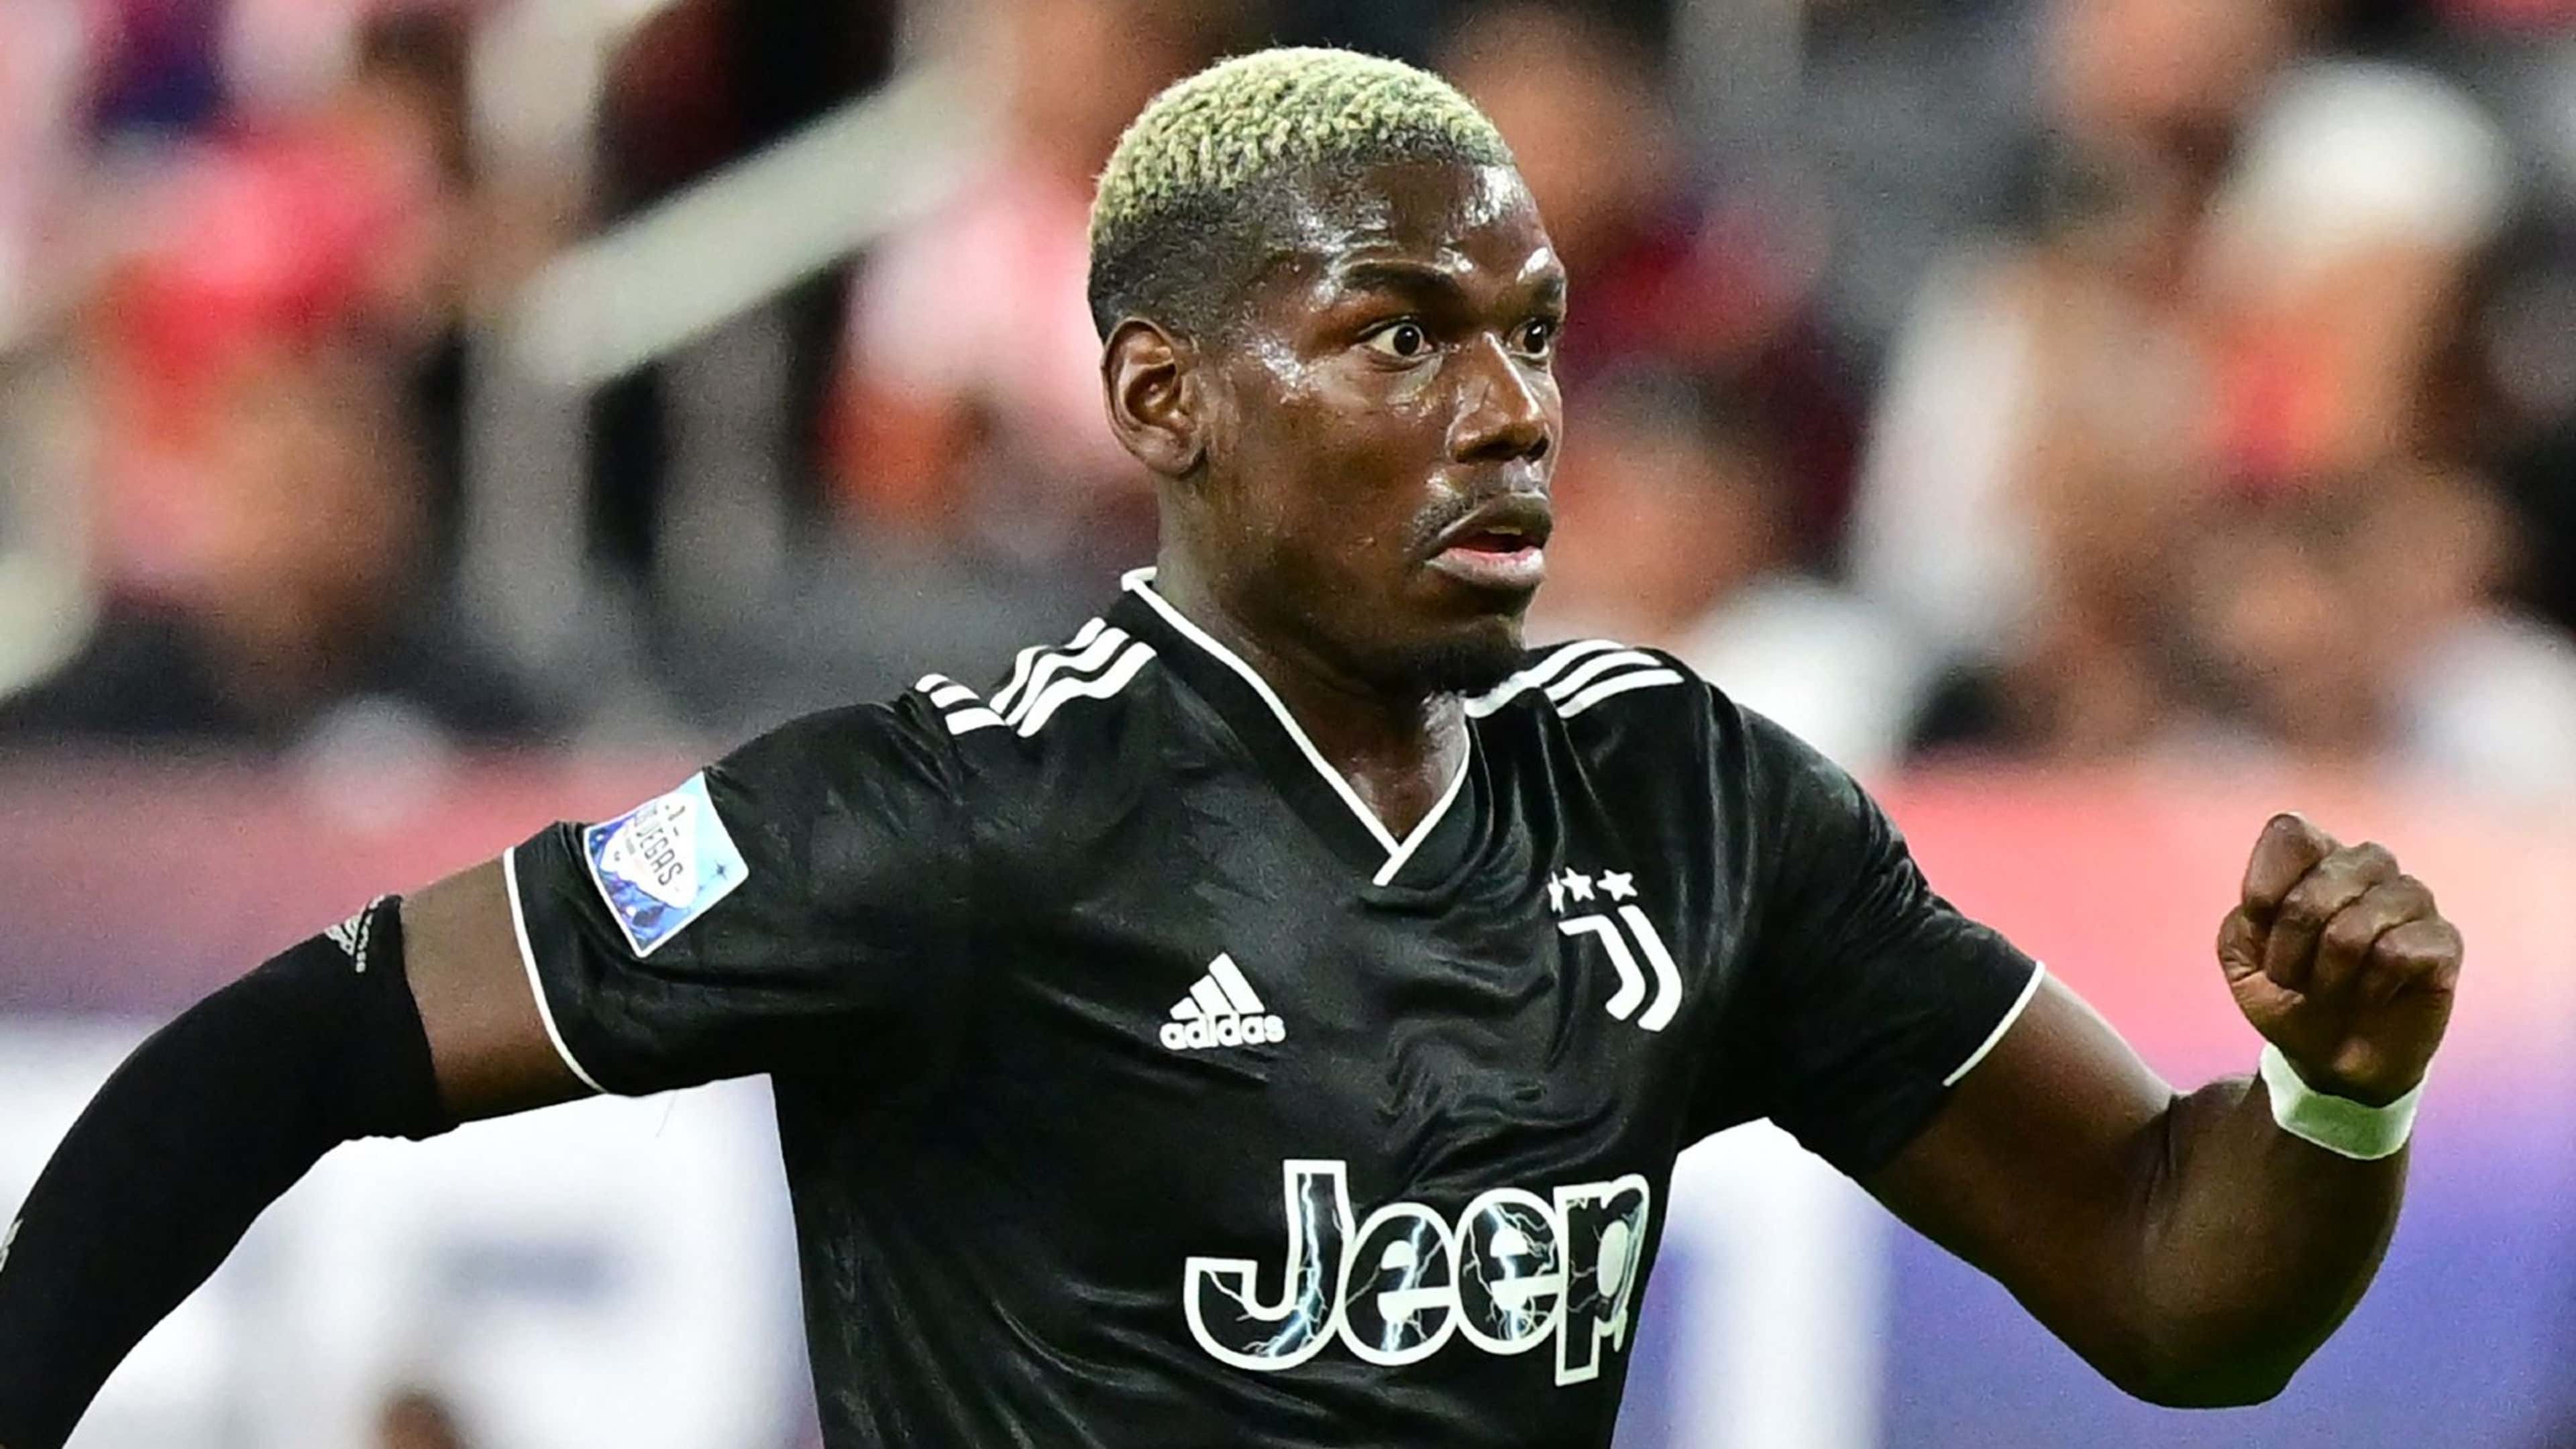 Injured France midfielder Pogba fails recovery, out of World Cup